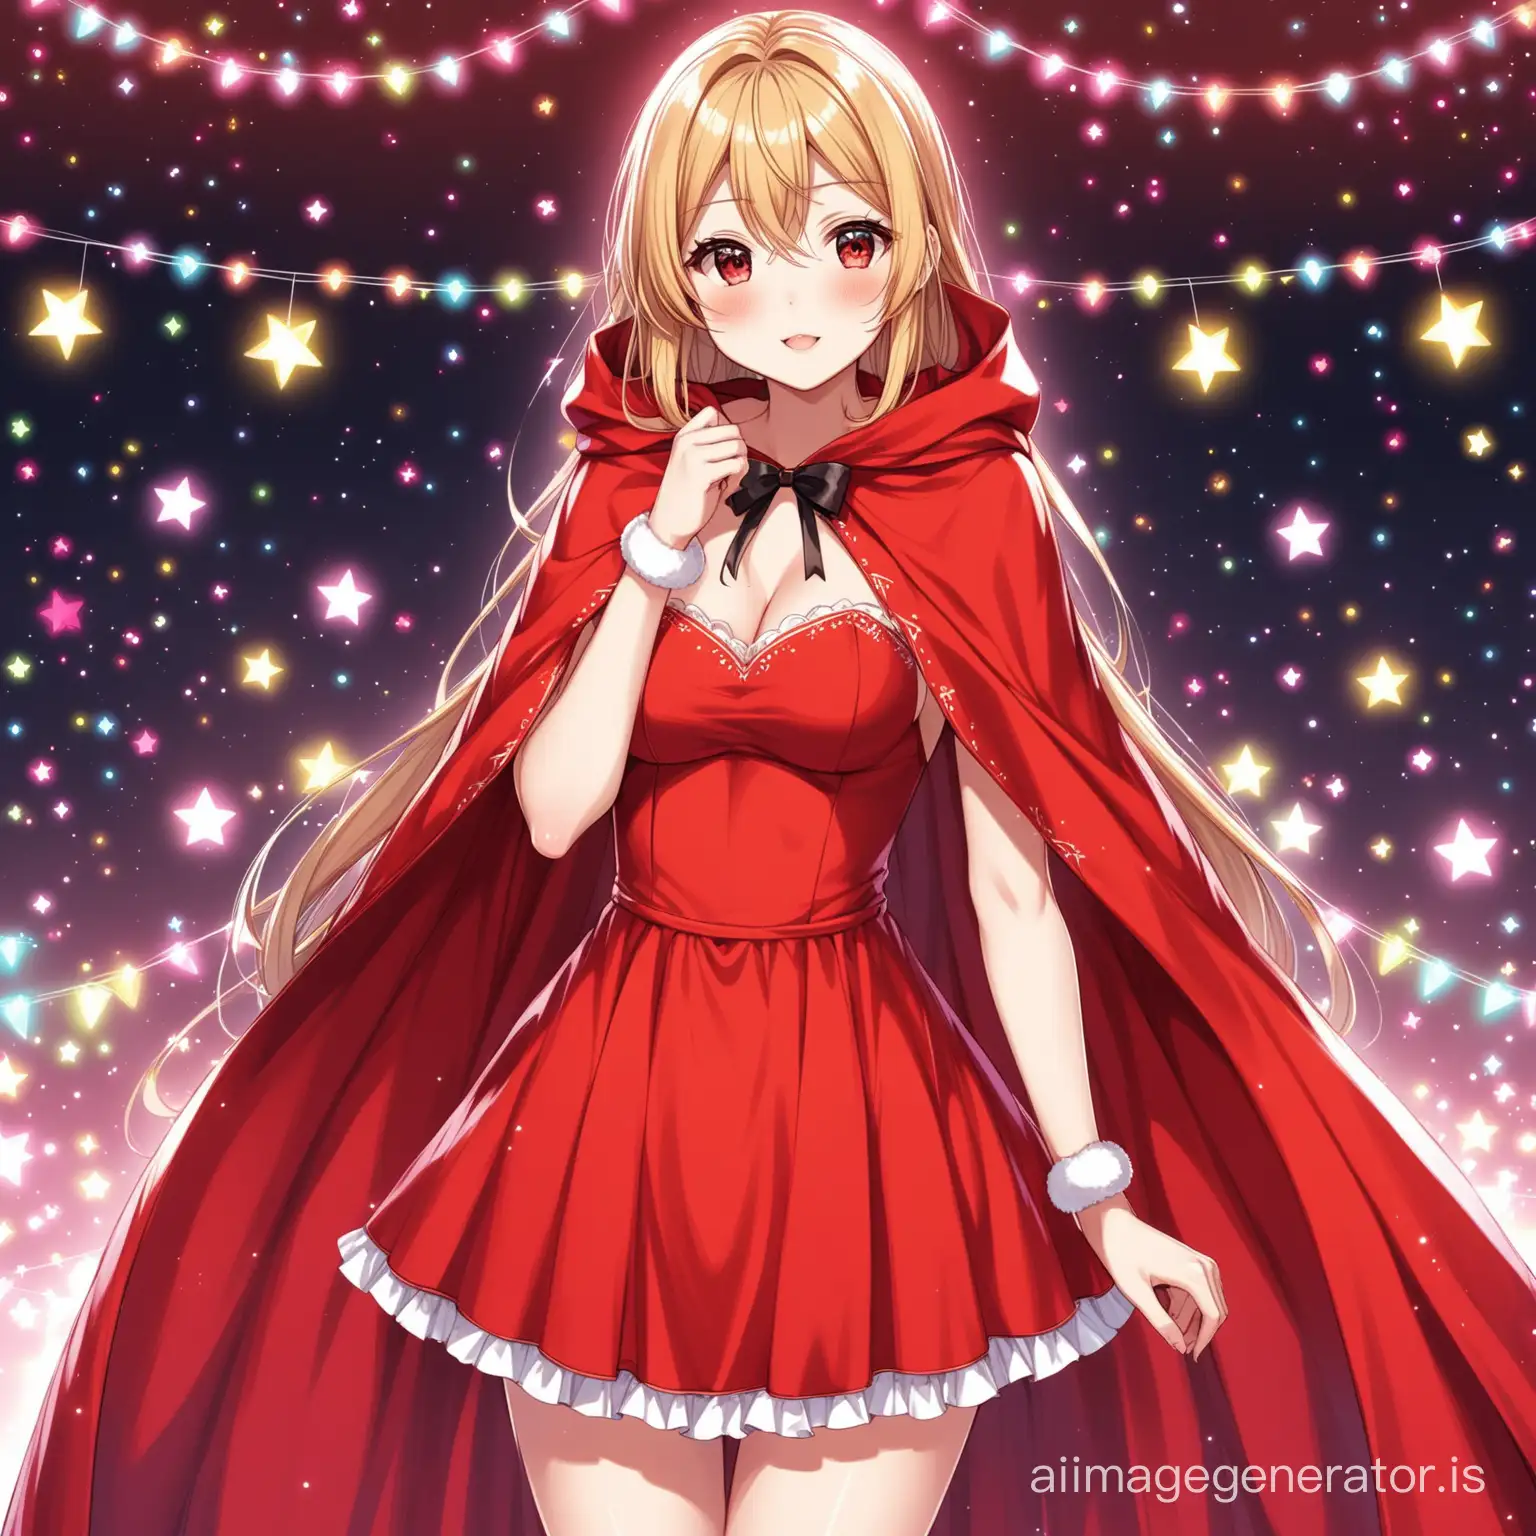 Anime-Girl-in-Red-Cape-and-Party-Dress-Enchanting-and-Stylish-Fantasy-Character-Art